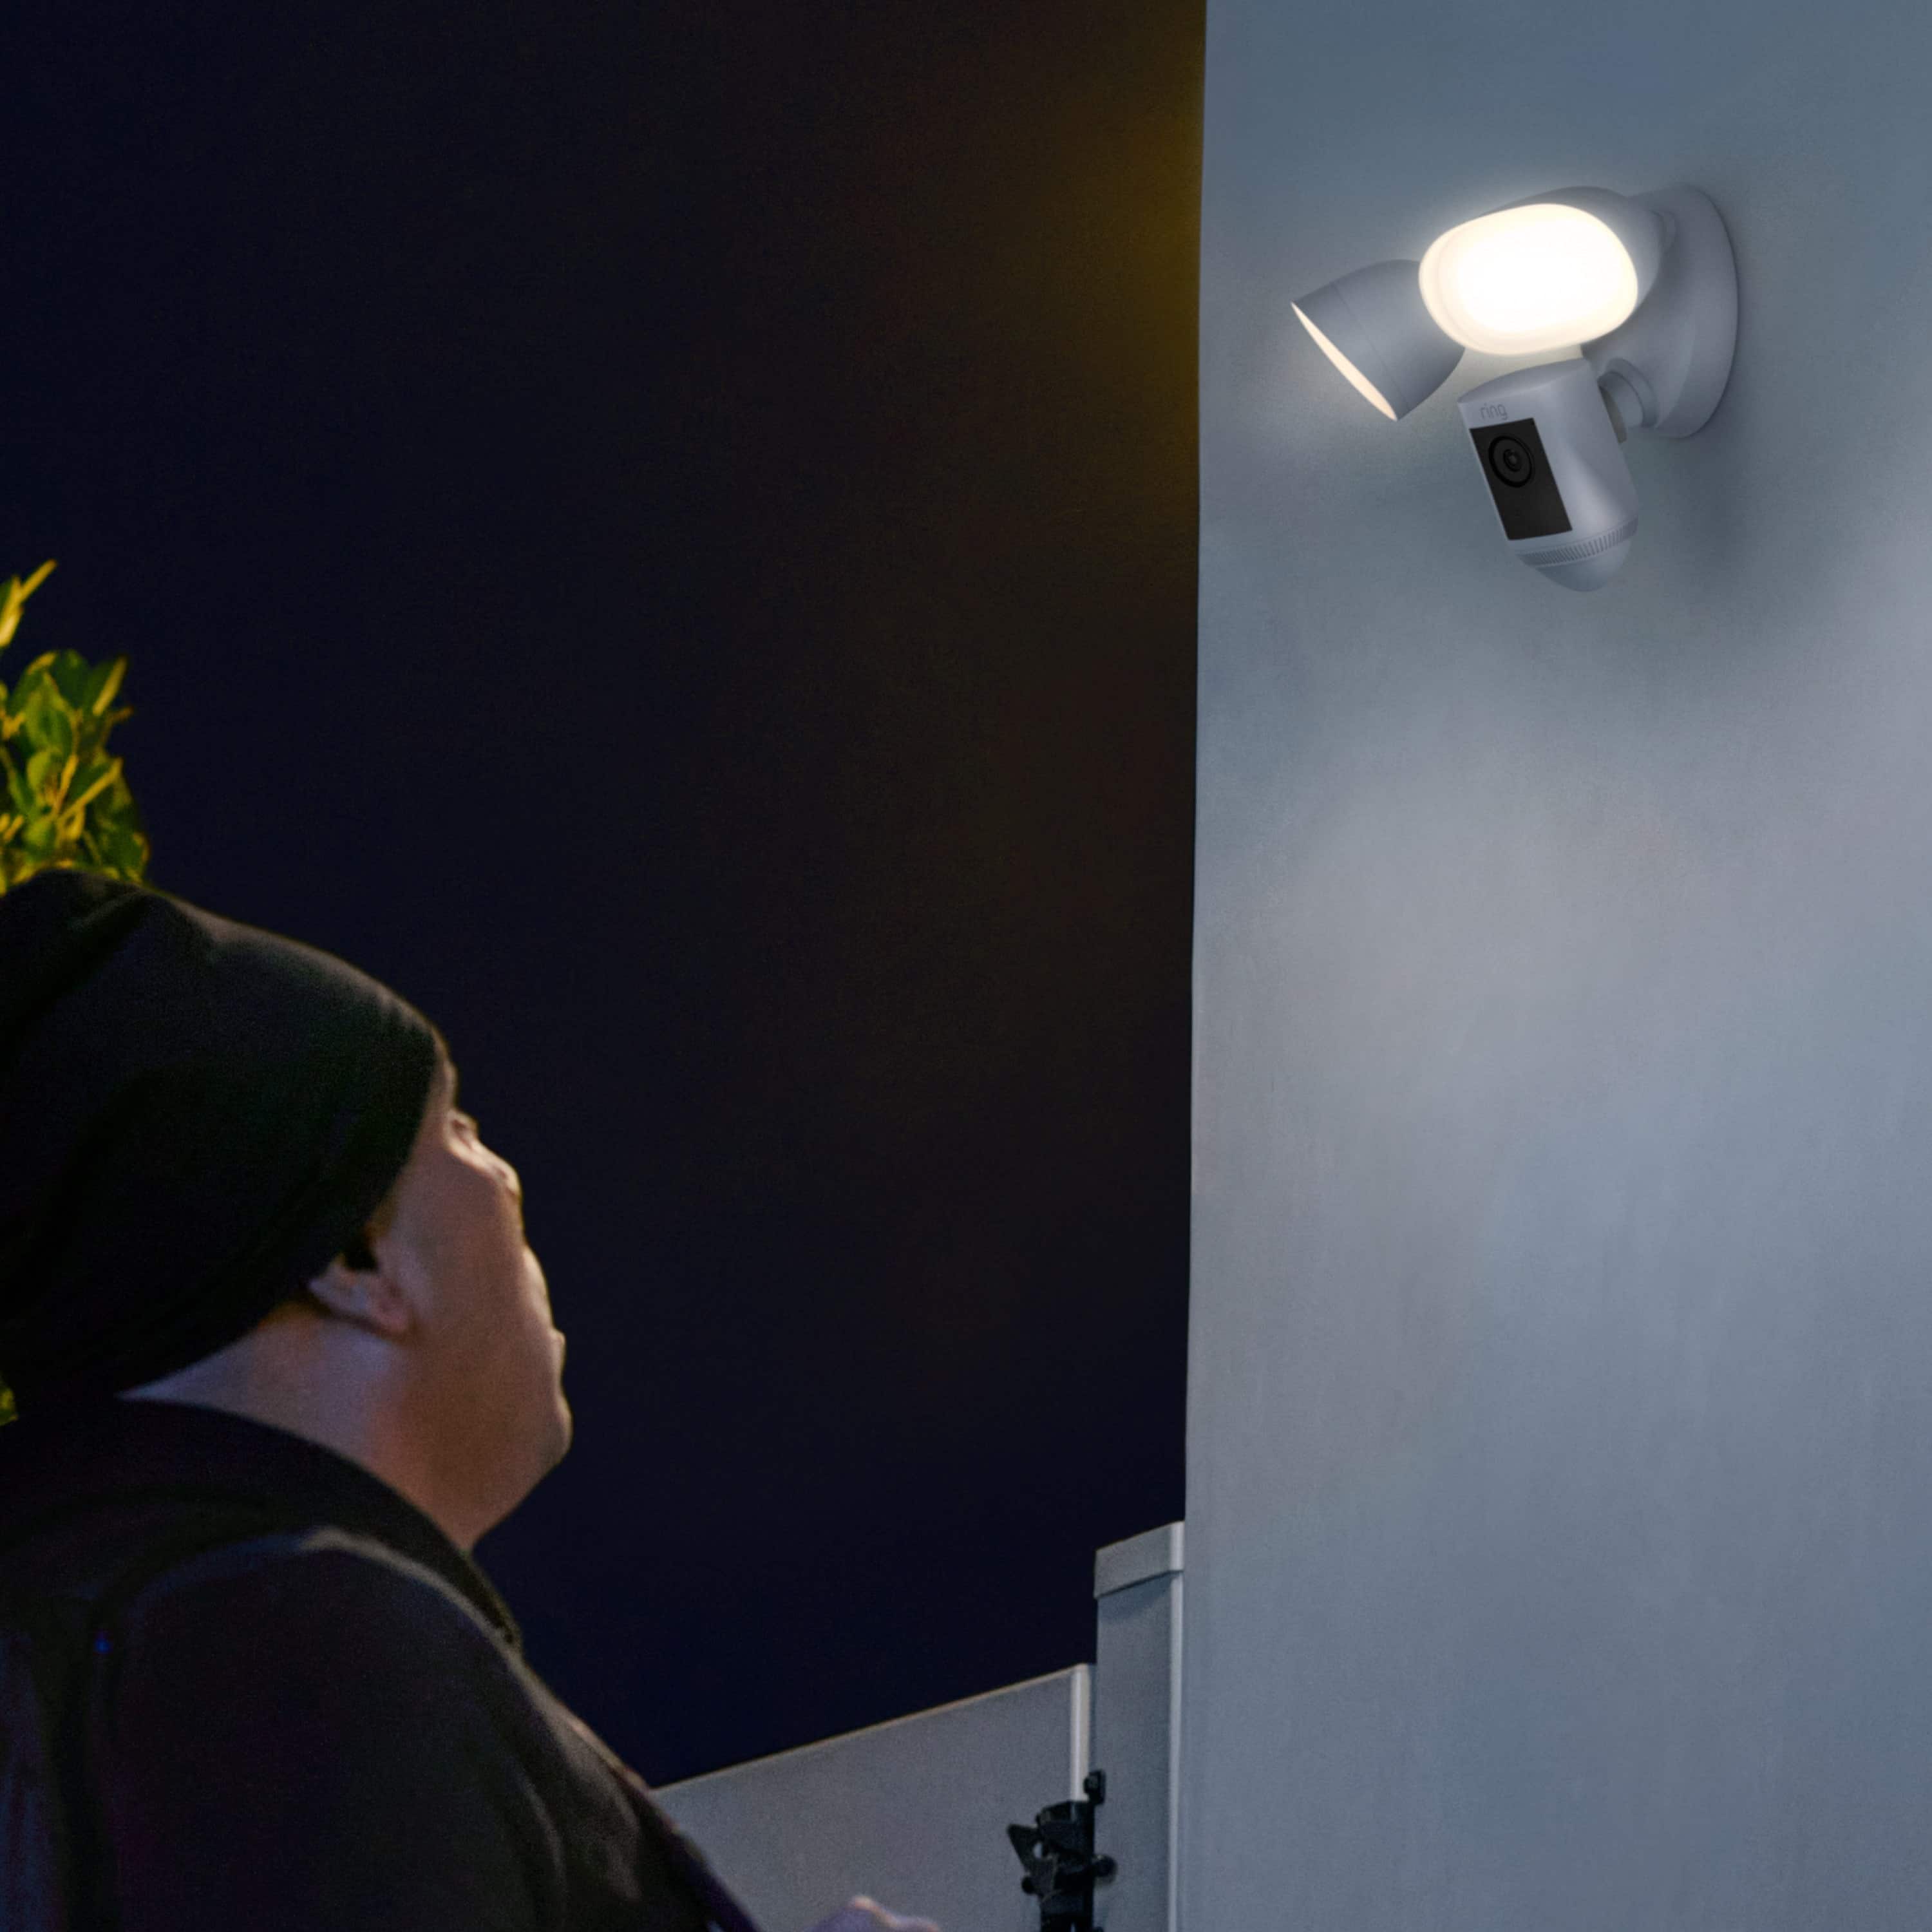 Floodlight Cam Pro (Plug-In) - Outside a home at night, a Floodlight Cam Pro shines light on a person dressed in black, who is looking up at the camera.